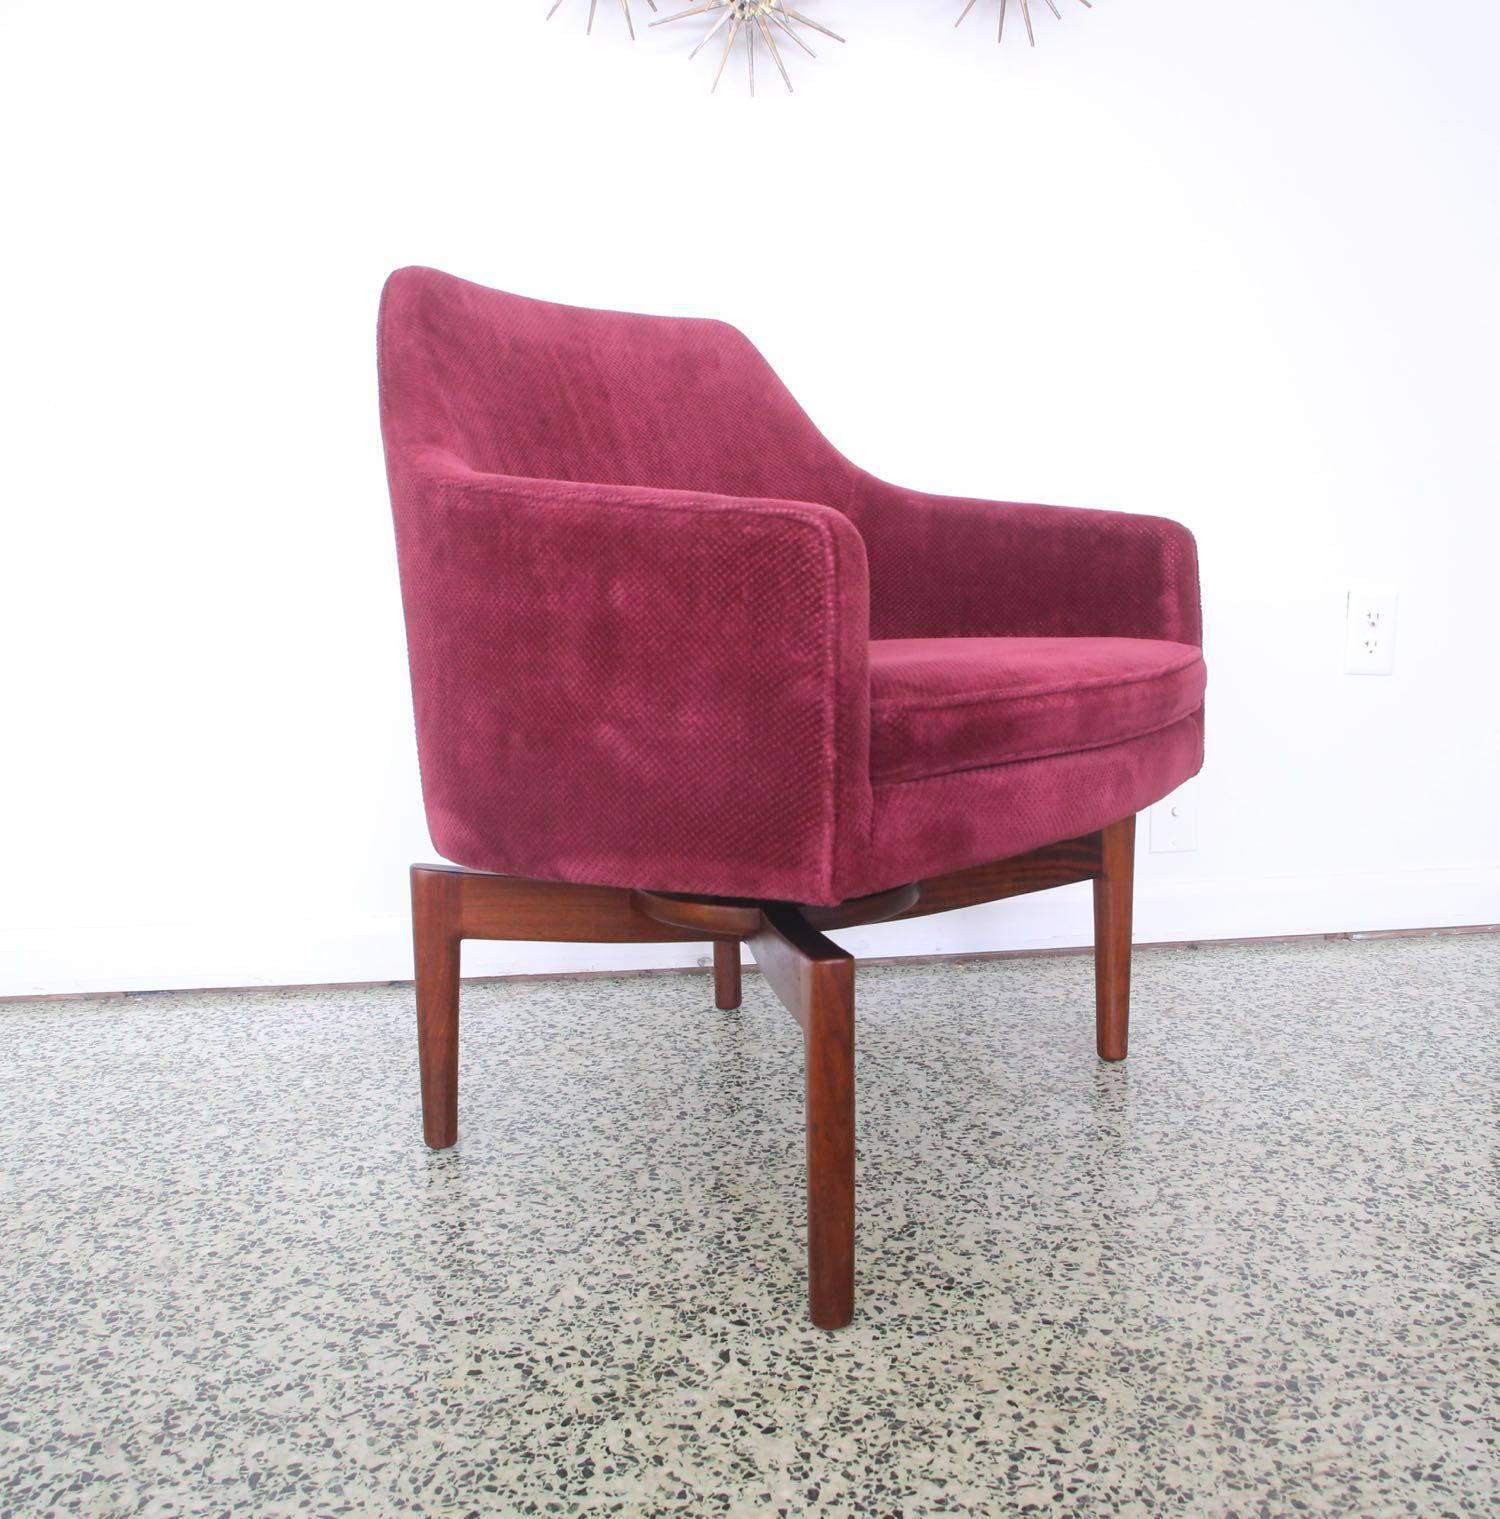 Designer: Jens Risom.
Manufacturer: Jens Risom.
Period/Style: Mid-Century Modern.
Country: United States. 
Date: 1960s.